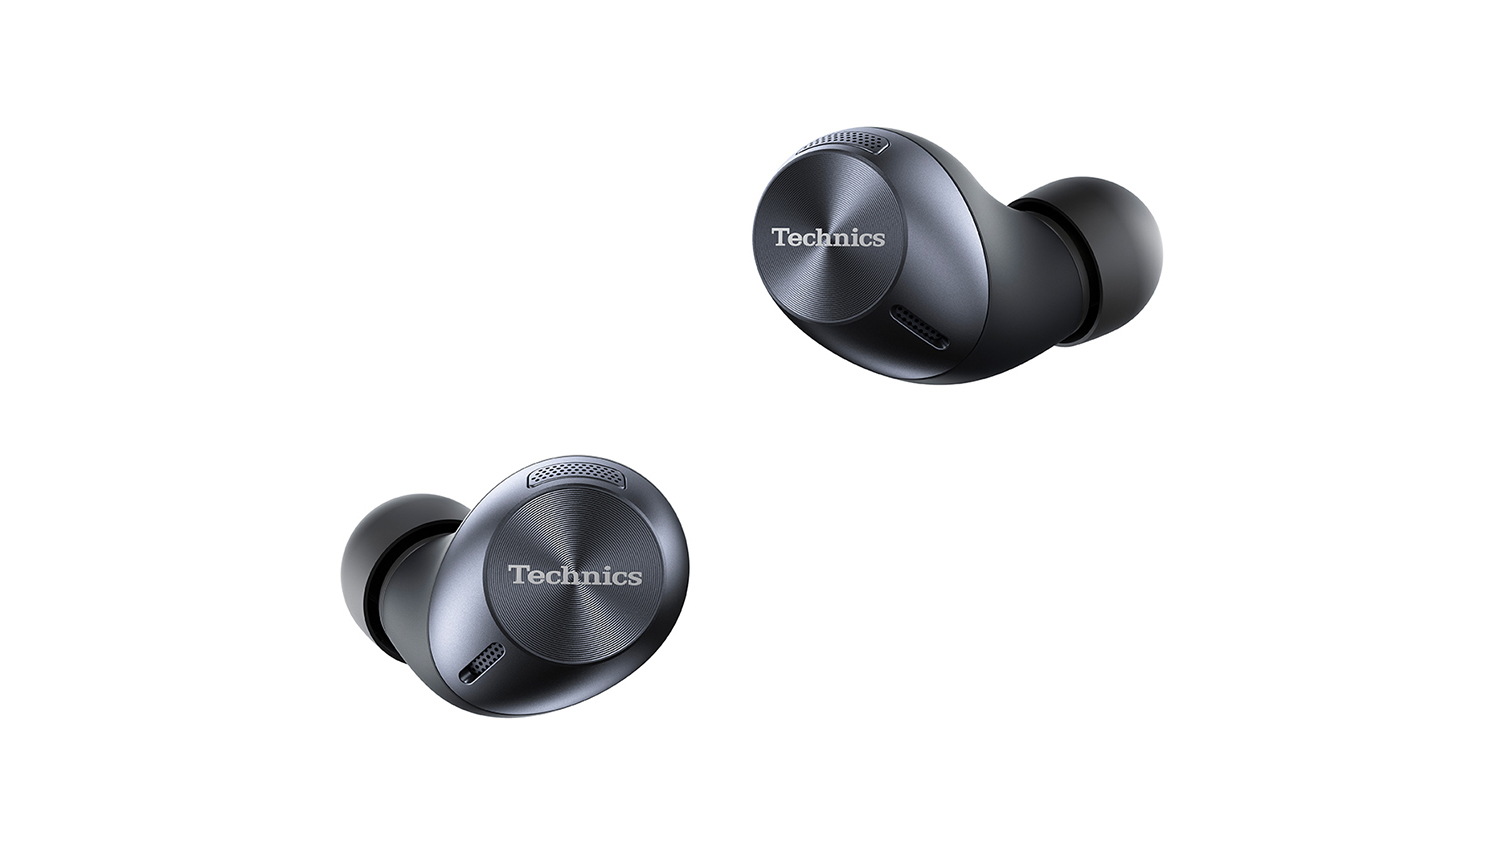 Technics HiFi True Wireless Multipoint Bluetooth Earbuds with Noise  Cancelling, Device Multipoint Connectivity, Wireless Charging, Impressive  Call Q